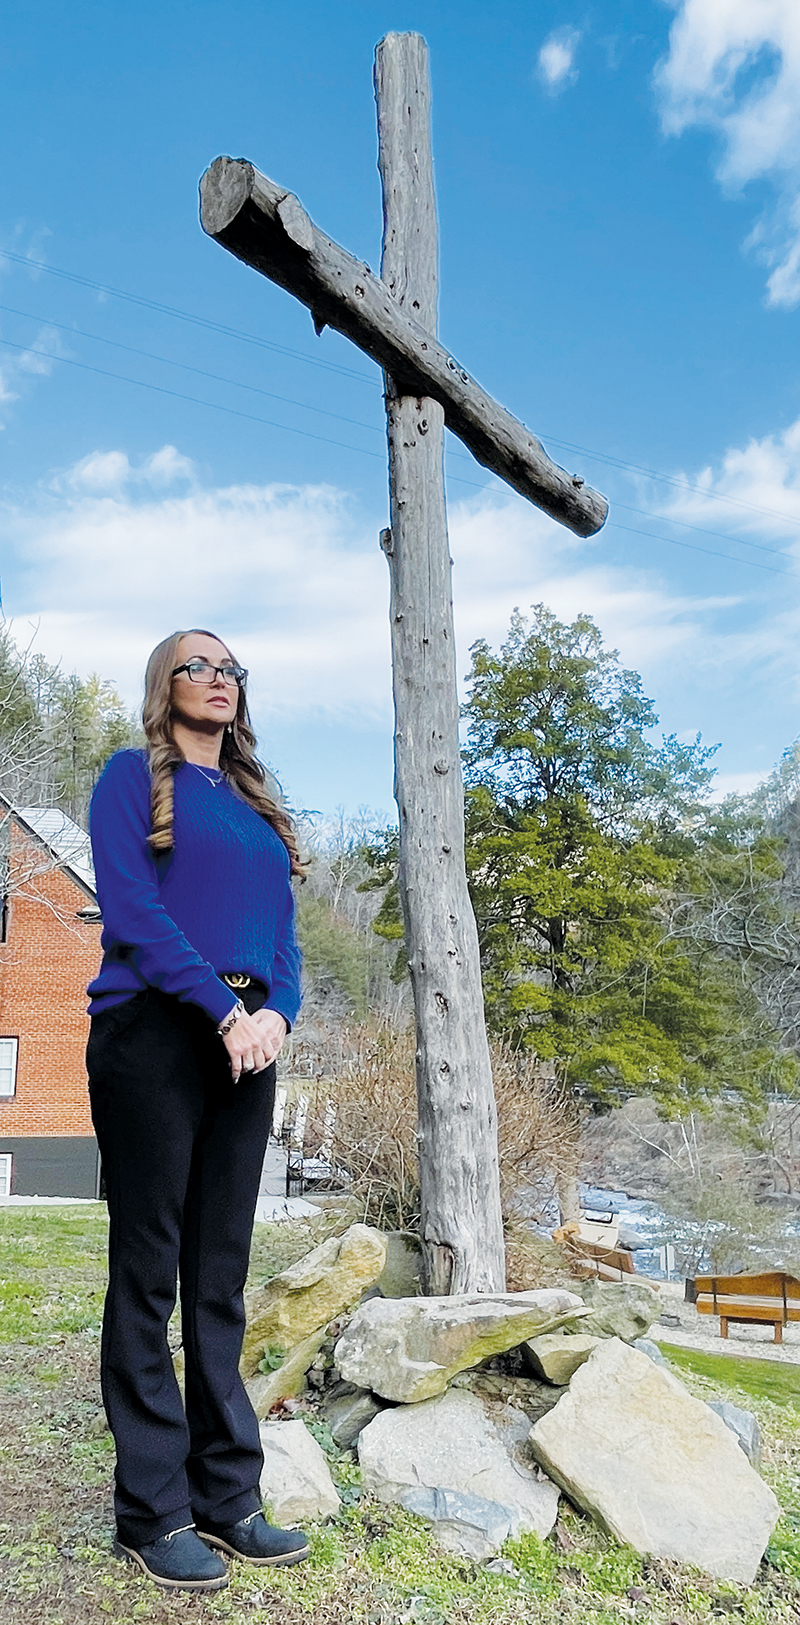 Valerie Frapp, events and marketing manager at Historic Tapoco Lodge, stands beside a timber cross overlooking the Cheoah River beside the lodge. Kimberly Vaught had the cross constructed to her specifications for Easter Sunday in 2019.